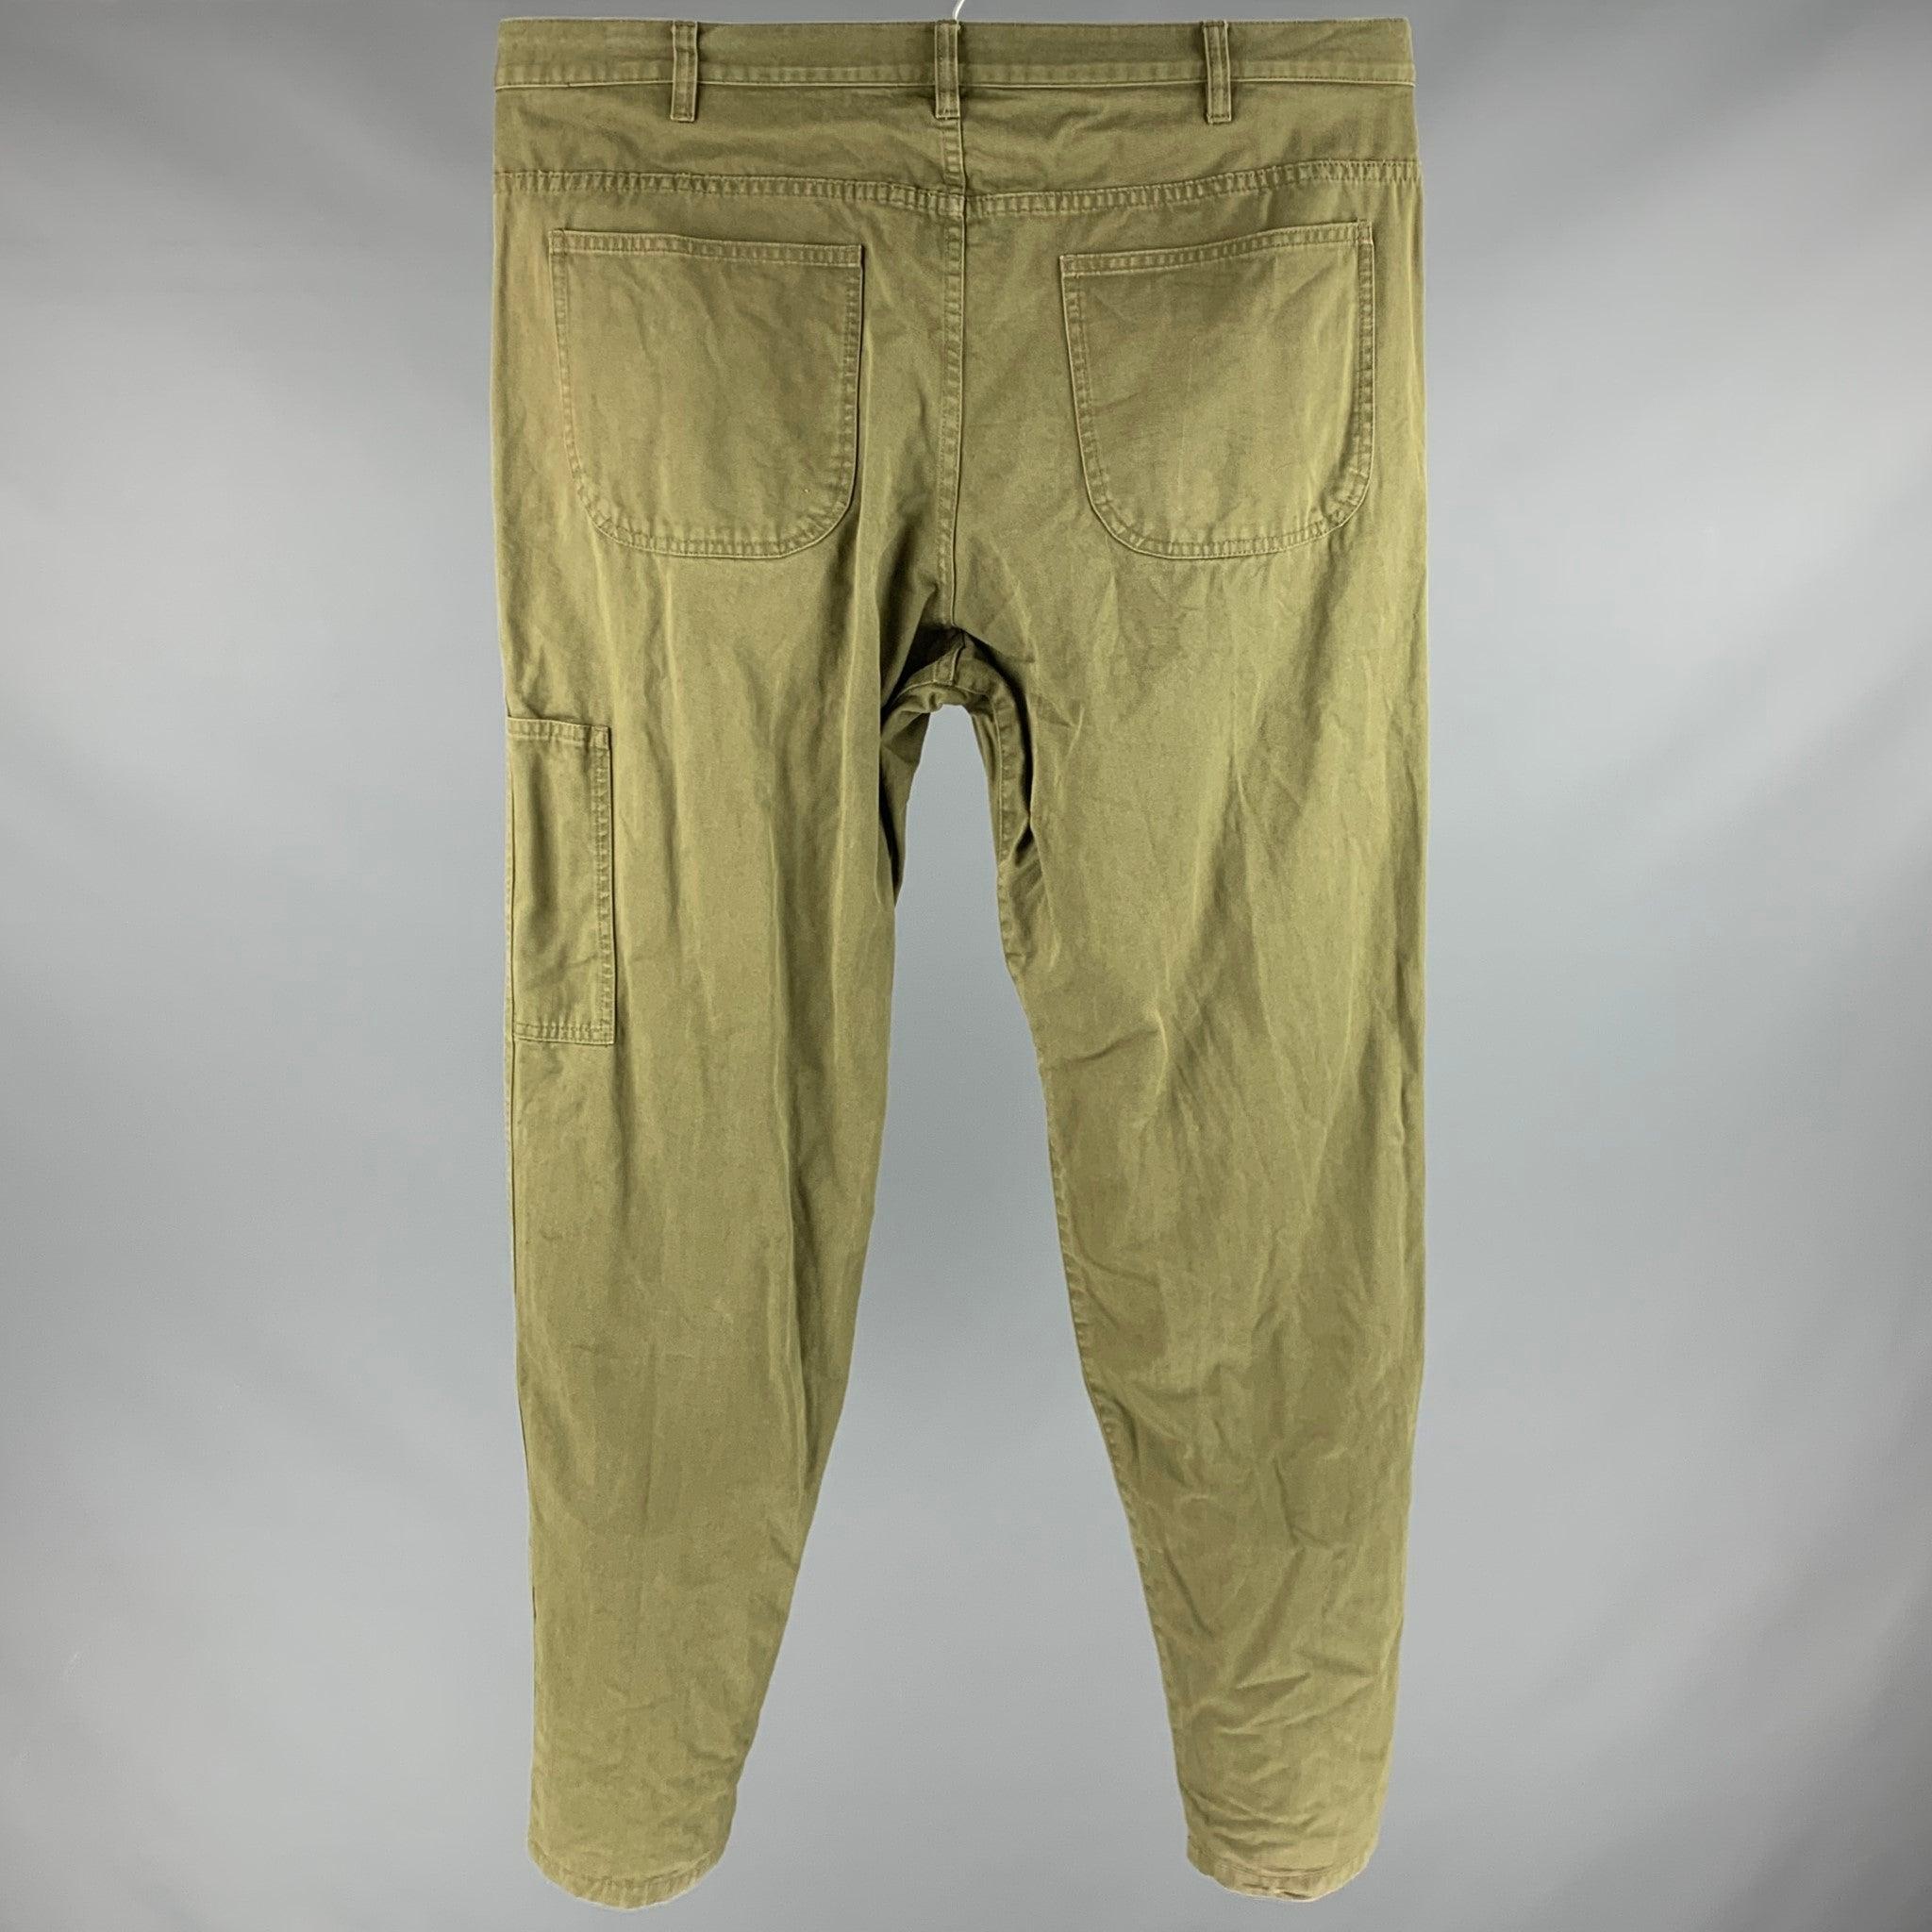 A.P.C. casual pants
in a green cotton fabric featuring a jean cut, five pockets, and a zip fly closure.Good Pre-Owned Condition. Moderate signs of wear. 

Marked:   34 

Measurements: 
  Waist: 34 inches Rise: 10 inches Inseam: 31 inches Leg